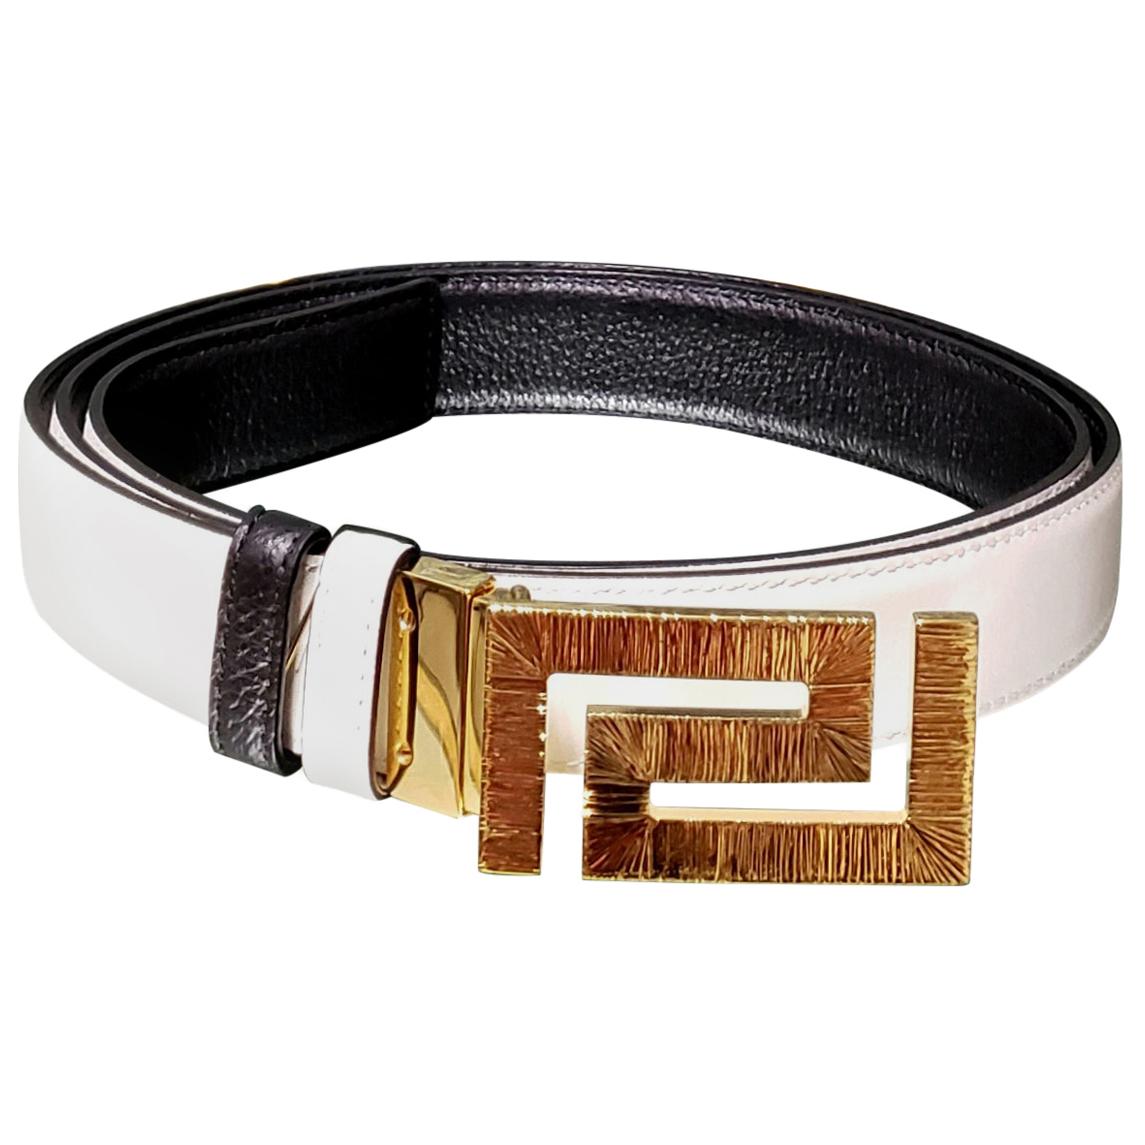 VERSACE BLACK & WHITE REVERSIBLE LEATHER MEN'S BELT with Gold Tone Buckle 115/46